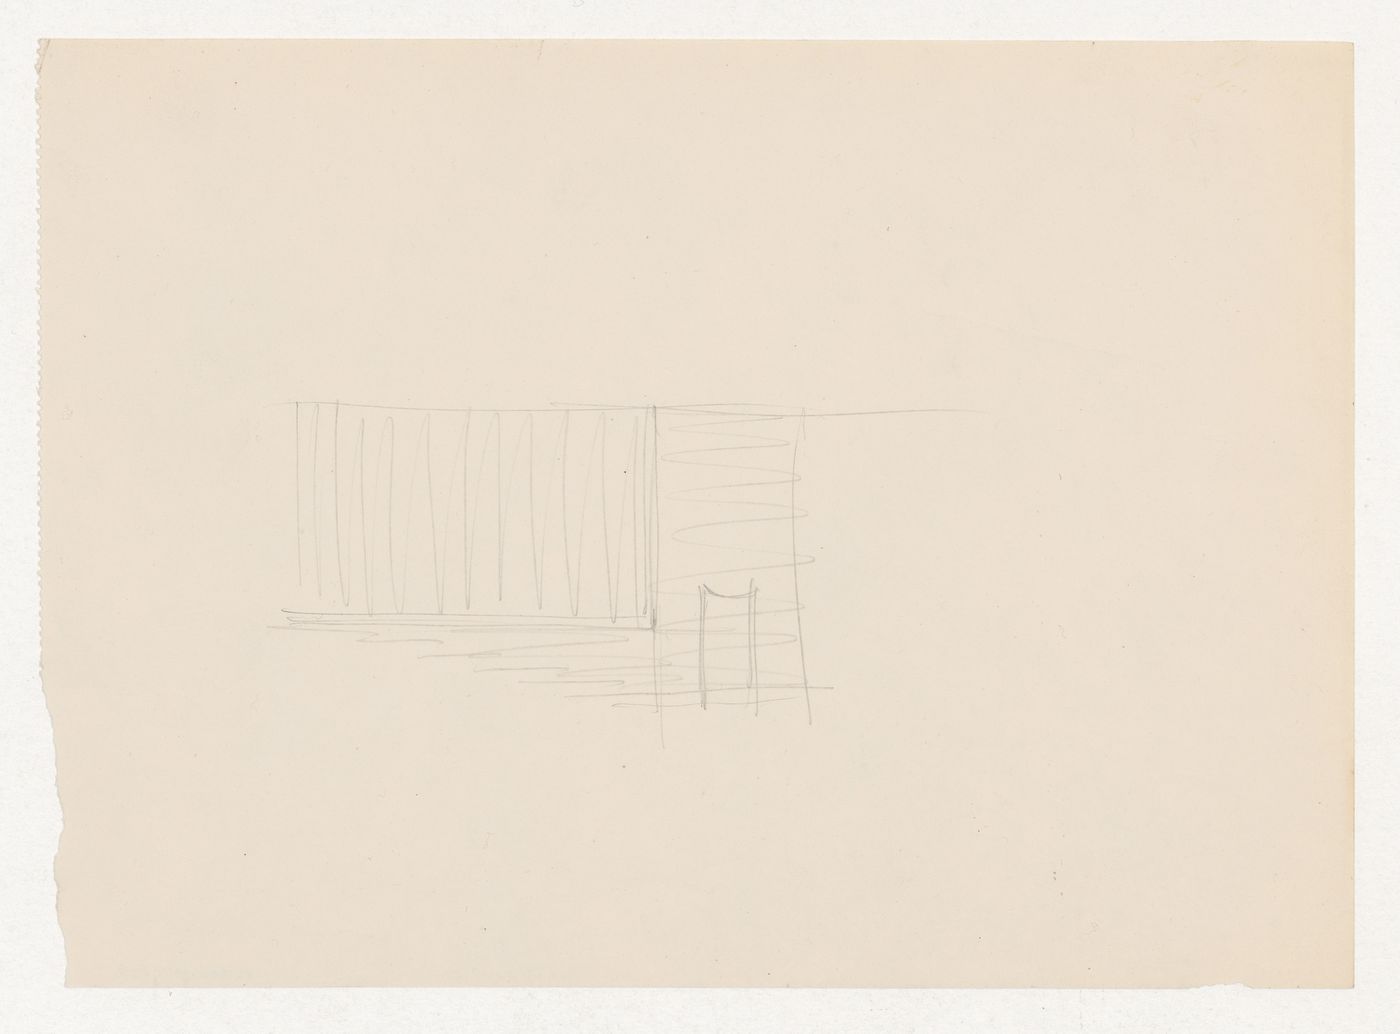 Sketch interior elevation for an auditorium for the Metallurgy Building, Illinois Institute of Technology, Chicago